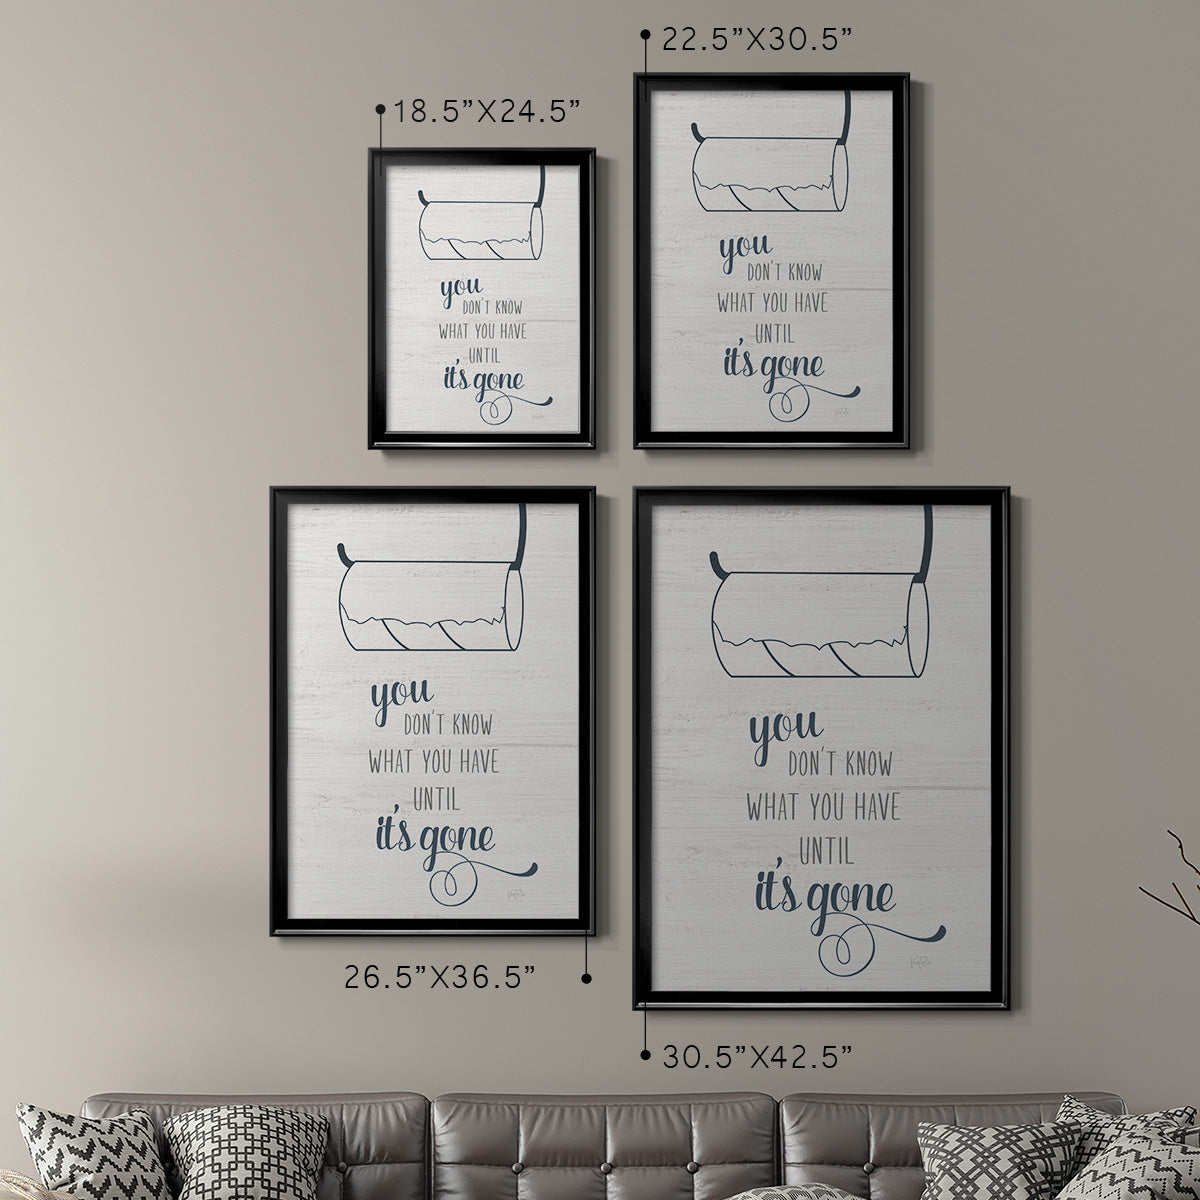 Until It's Gone Premium Framed Print - Ready to Hang